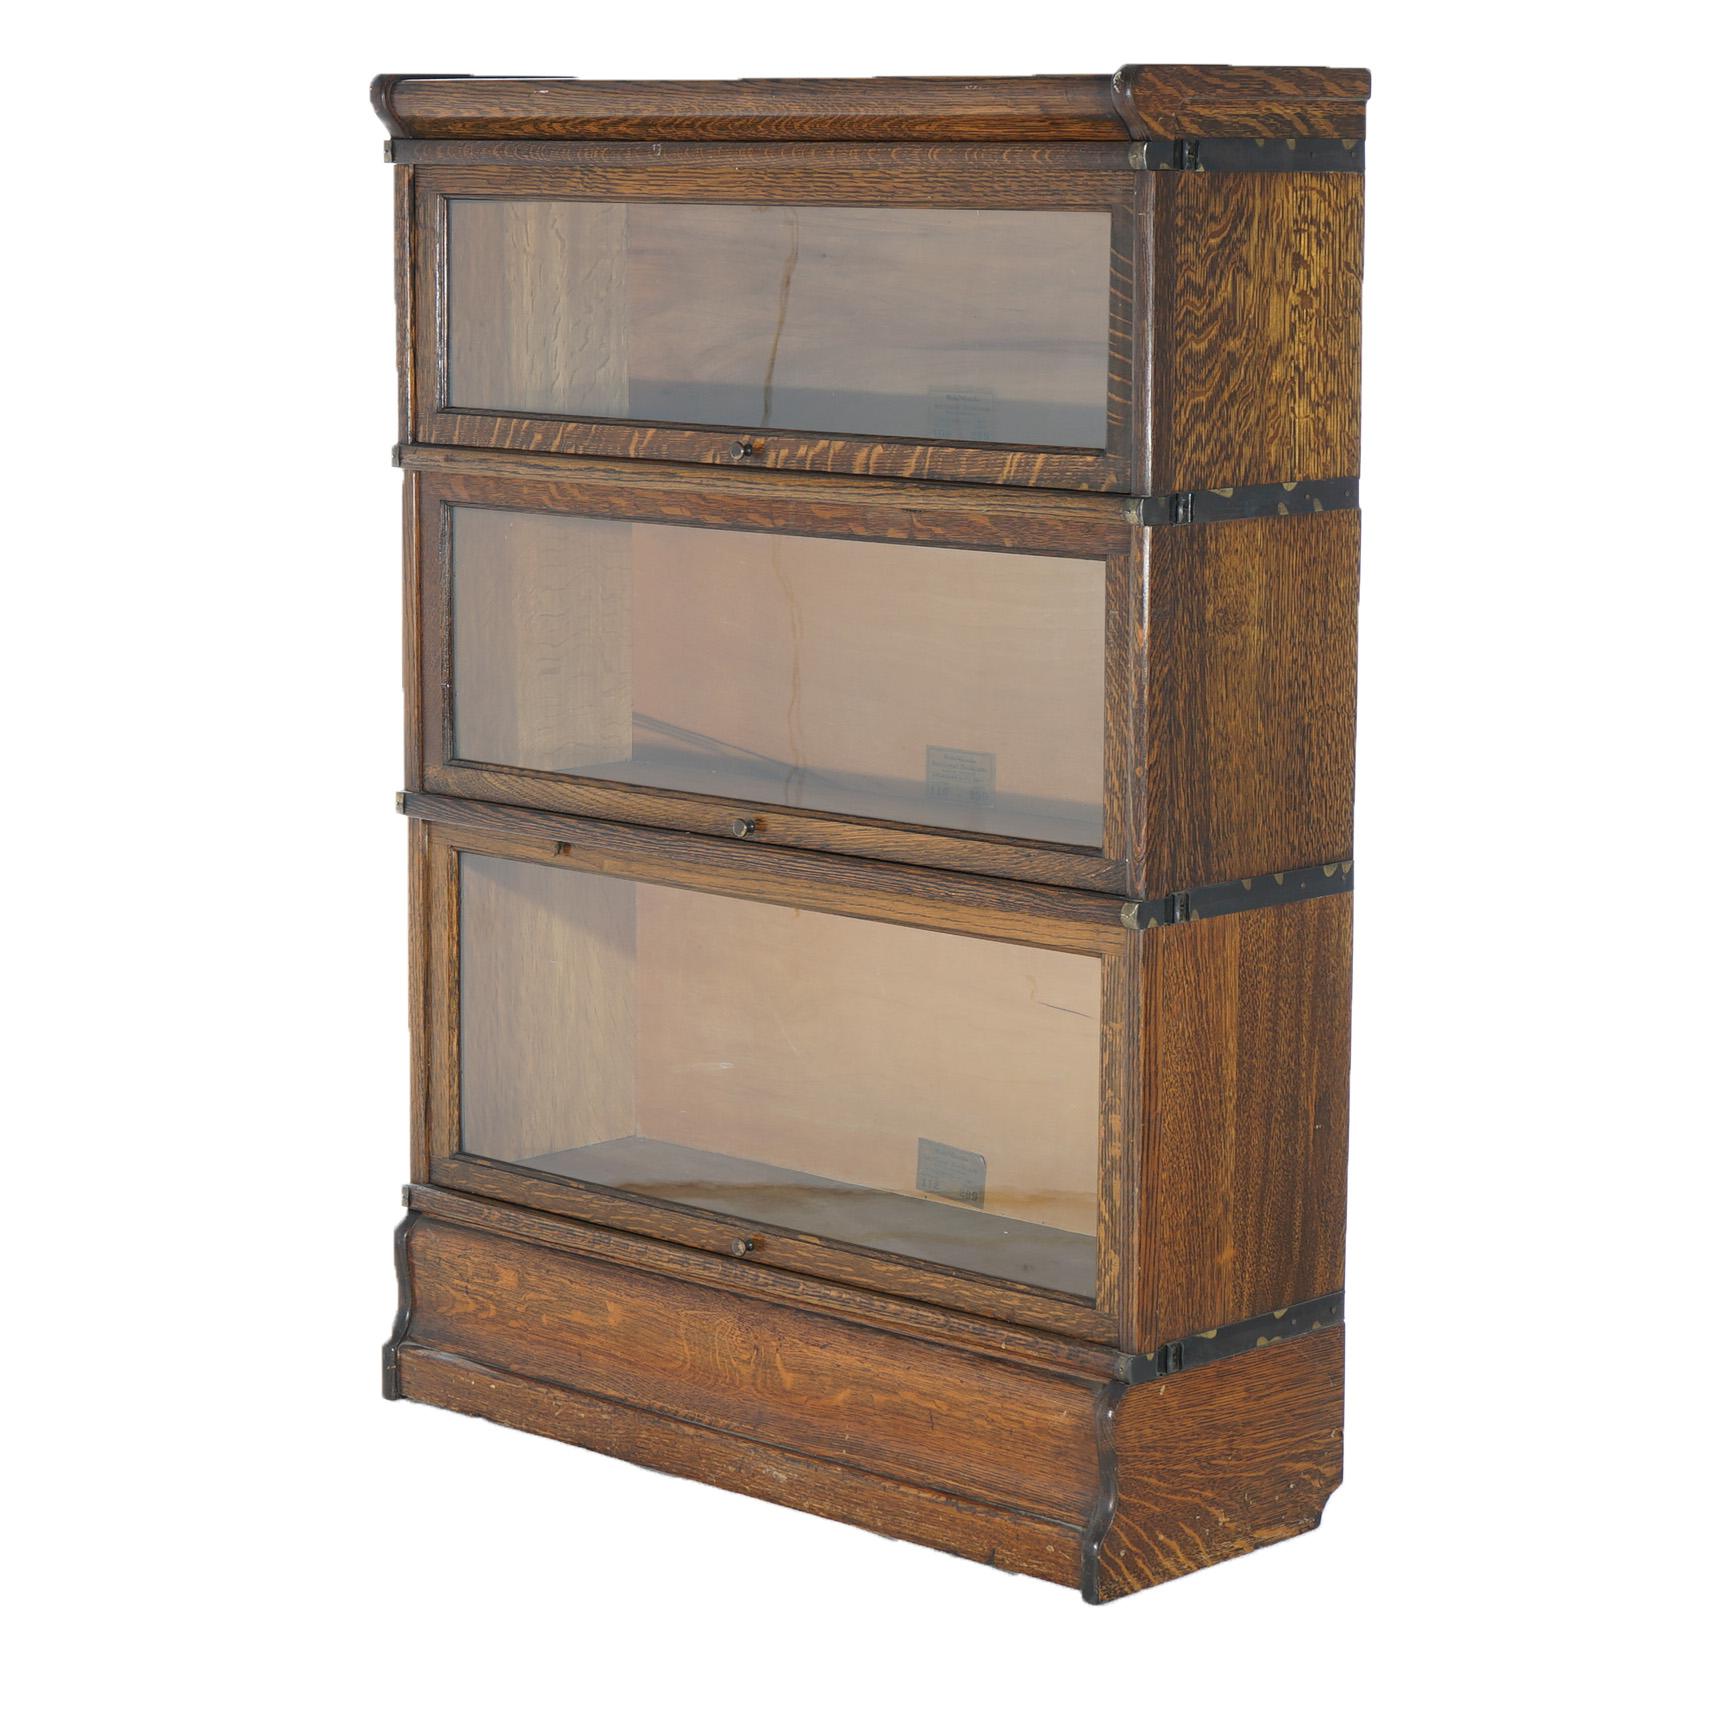 An antique Mission Arts and Crafts barrister bookcase by Globe Wernicke offers quarter sawn oak construction with three stacks, each having a pull-out glass door, raised on an ogee base; maker labels as photographed; c1920

Measures - 47